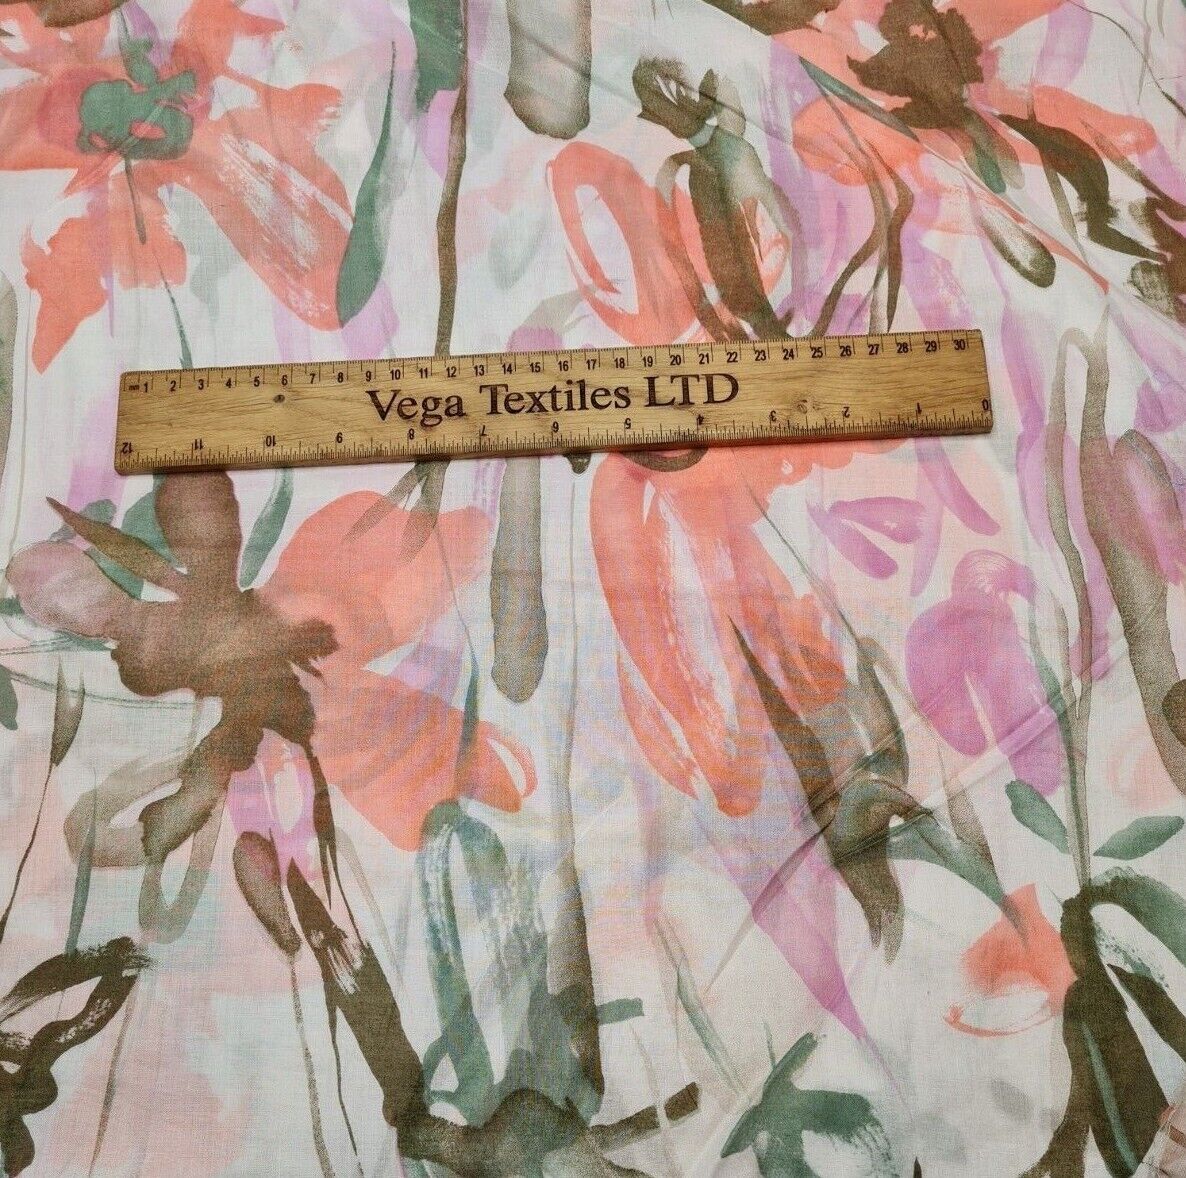 Cotton Voile Fabric Floral Printed 55" Wide